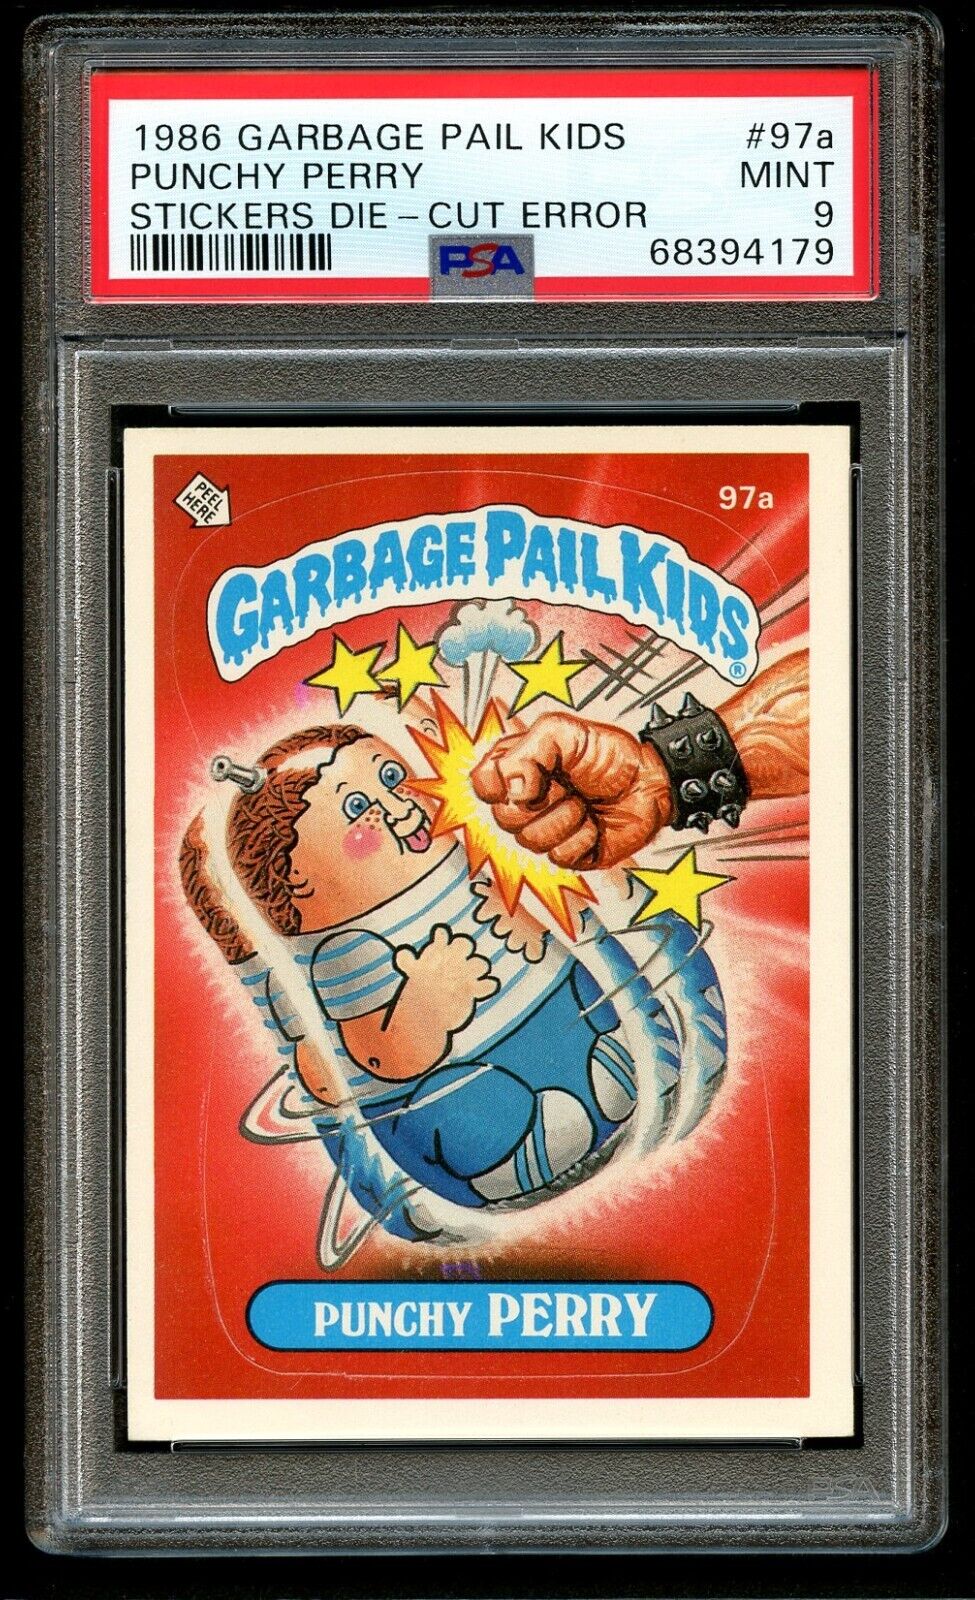 1986 Garbage Pail Kids PUNCHY PERRY *DIE CUT ERROR* #97a PSA 9 MINT - VERY RARE